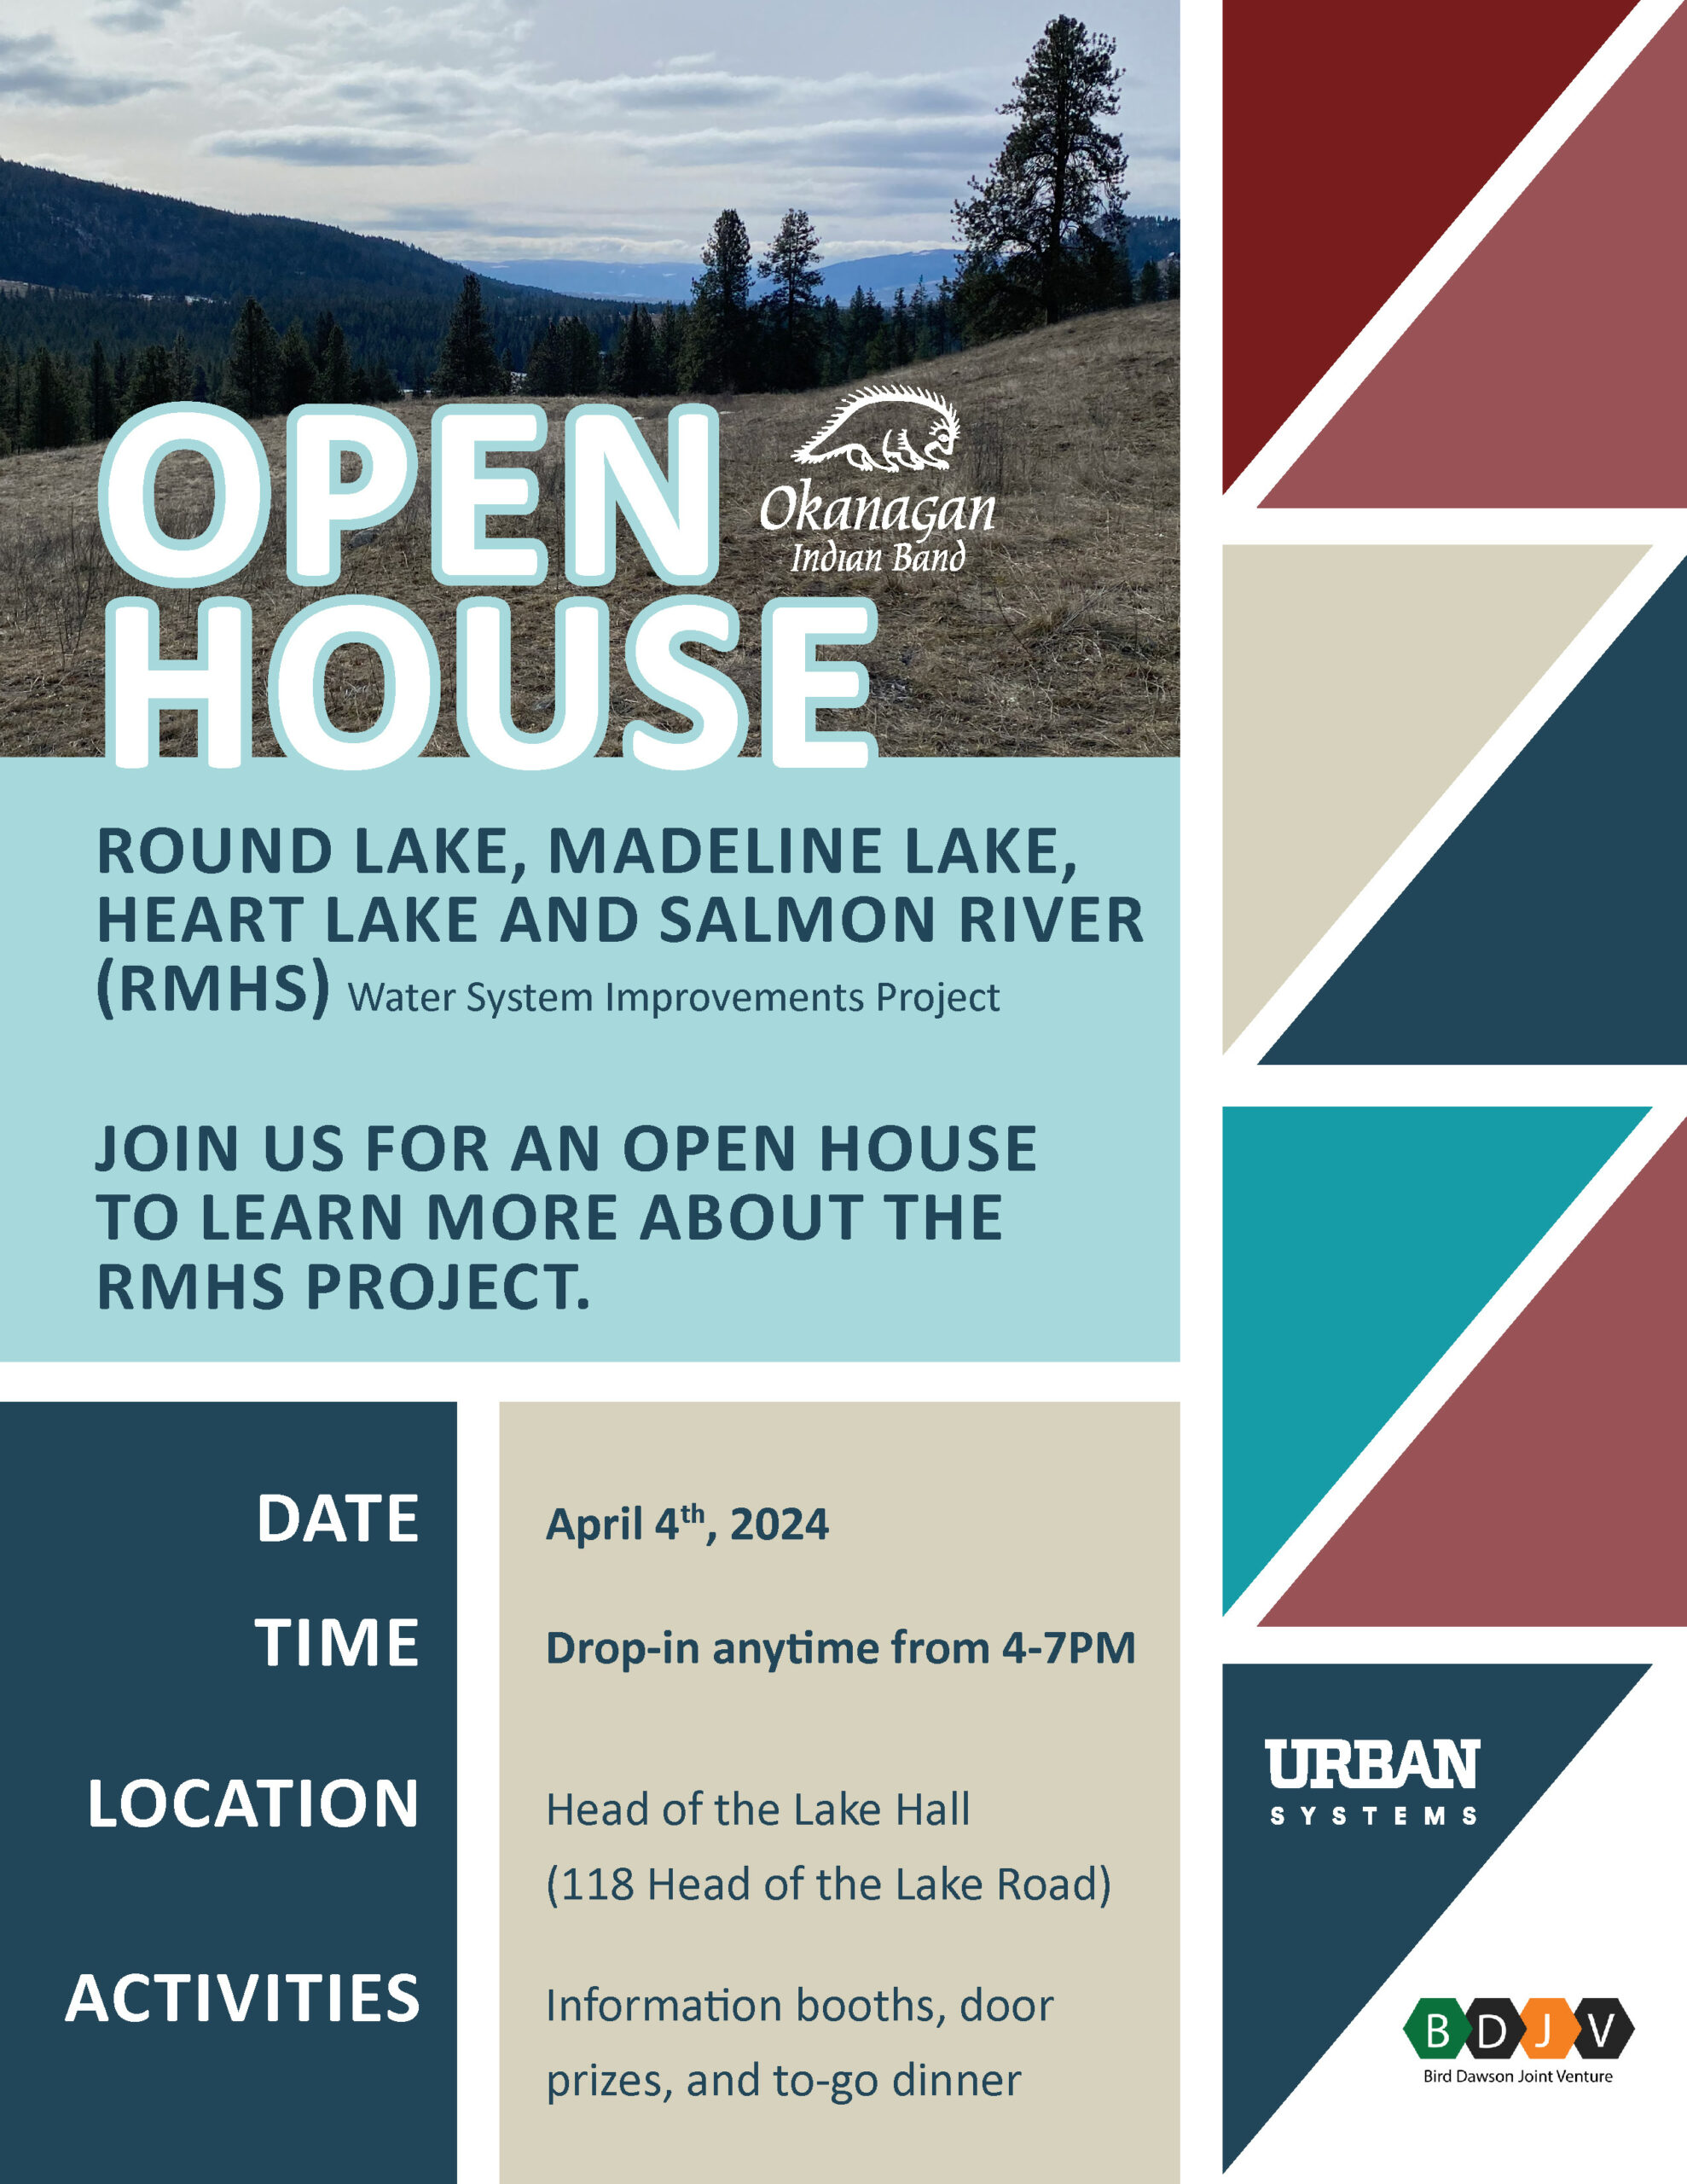 Reminder: Round Lake, Madeline Lake, Heart Lake and Salmon River Water System Improvements Project Open House happening tomorrow